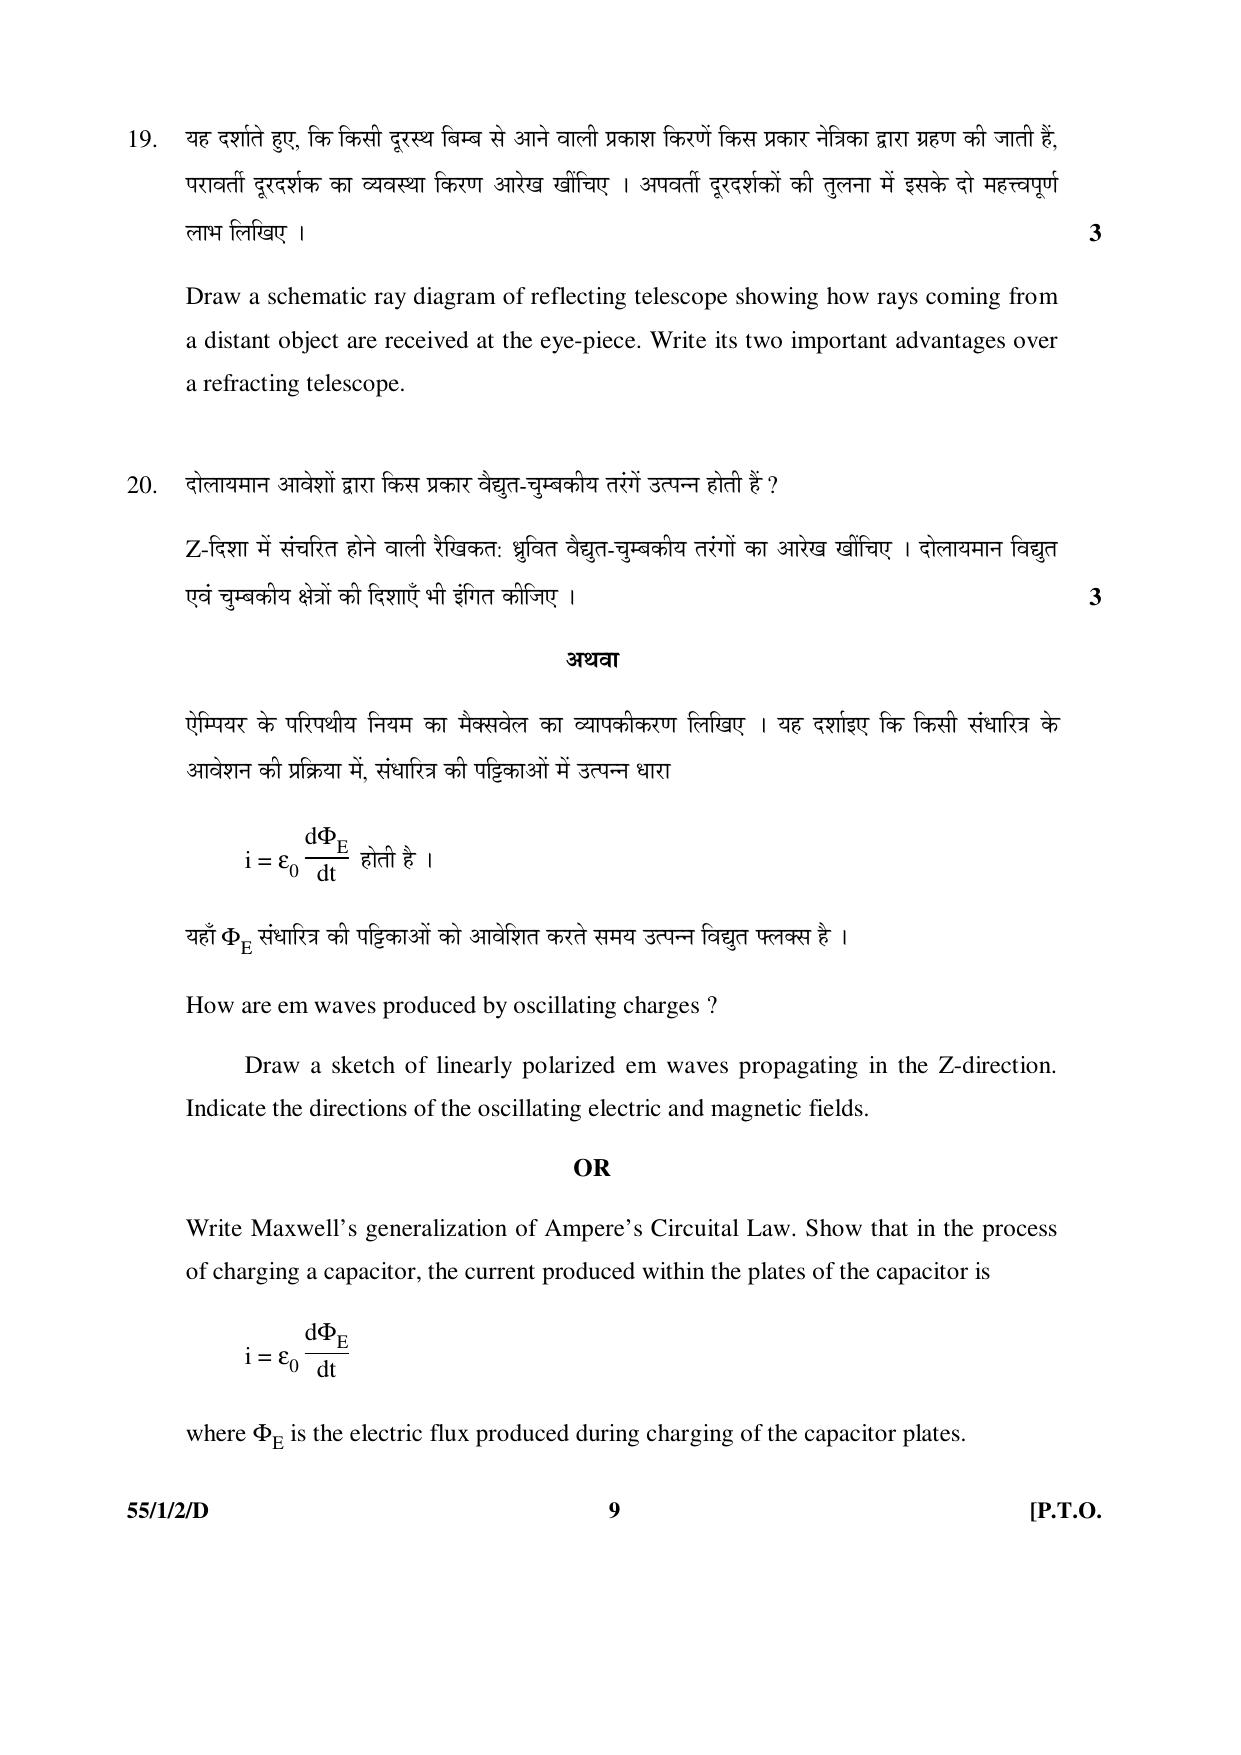 CBSE Class 12 55-1-2-D PHYSICS 2016 Question Paper - Page 9